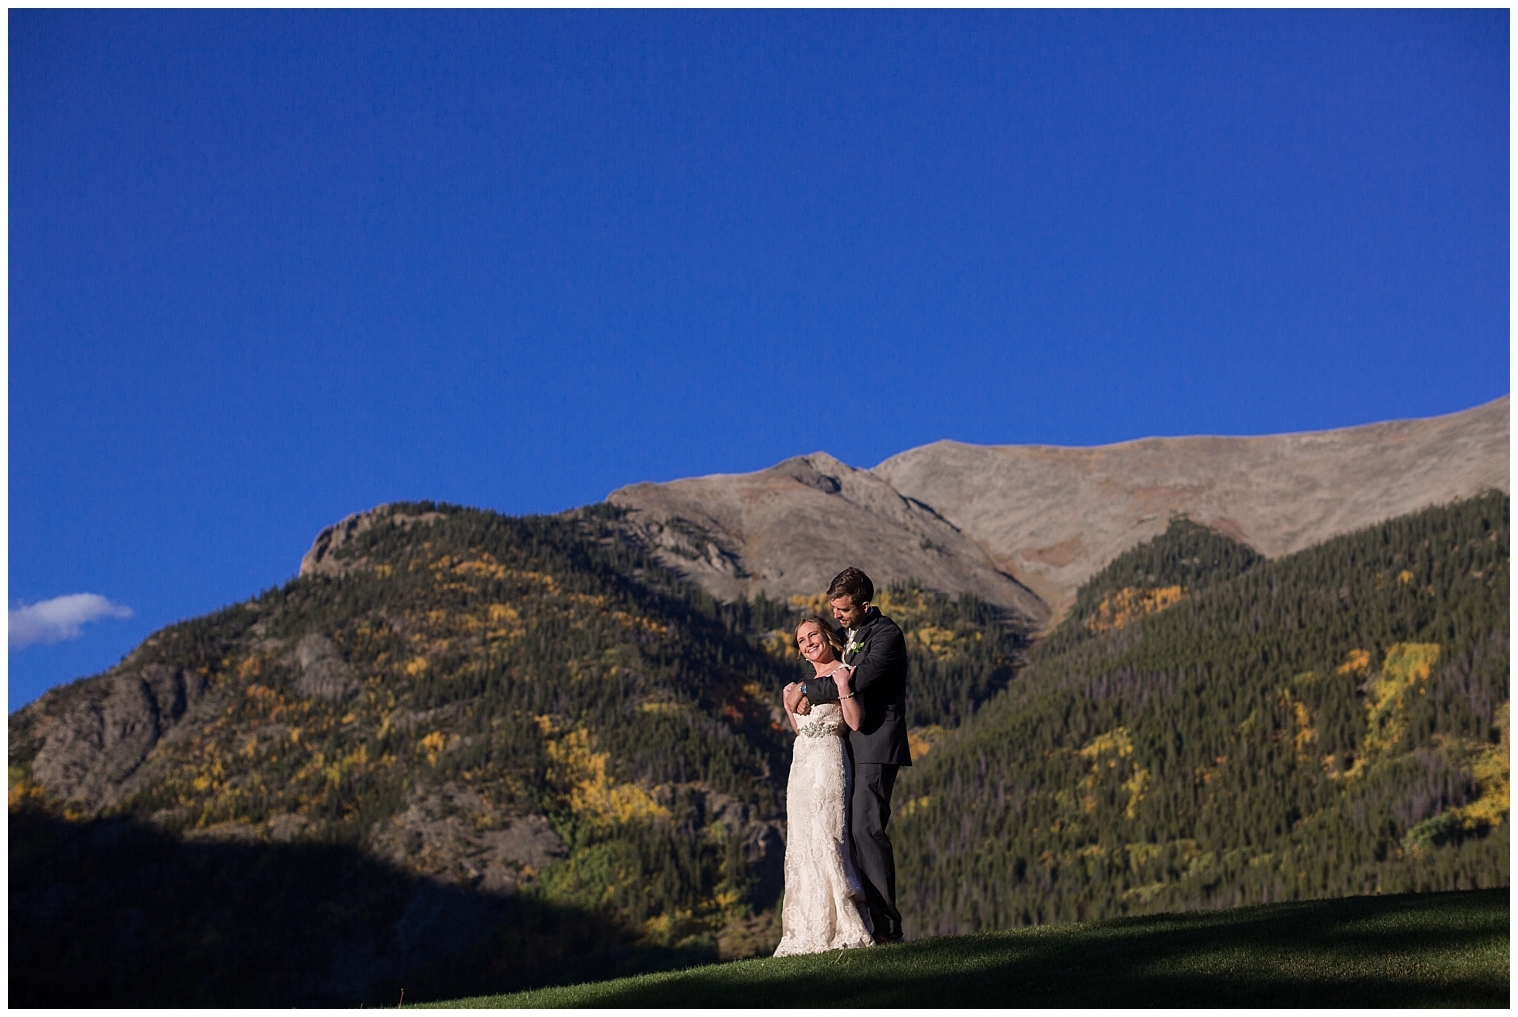 The wedding couple hug on a grassy knoll during portraits at their Copper Mountain wedding.